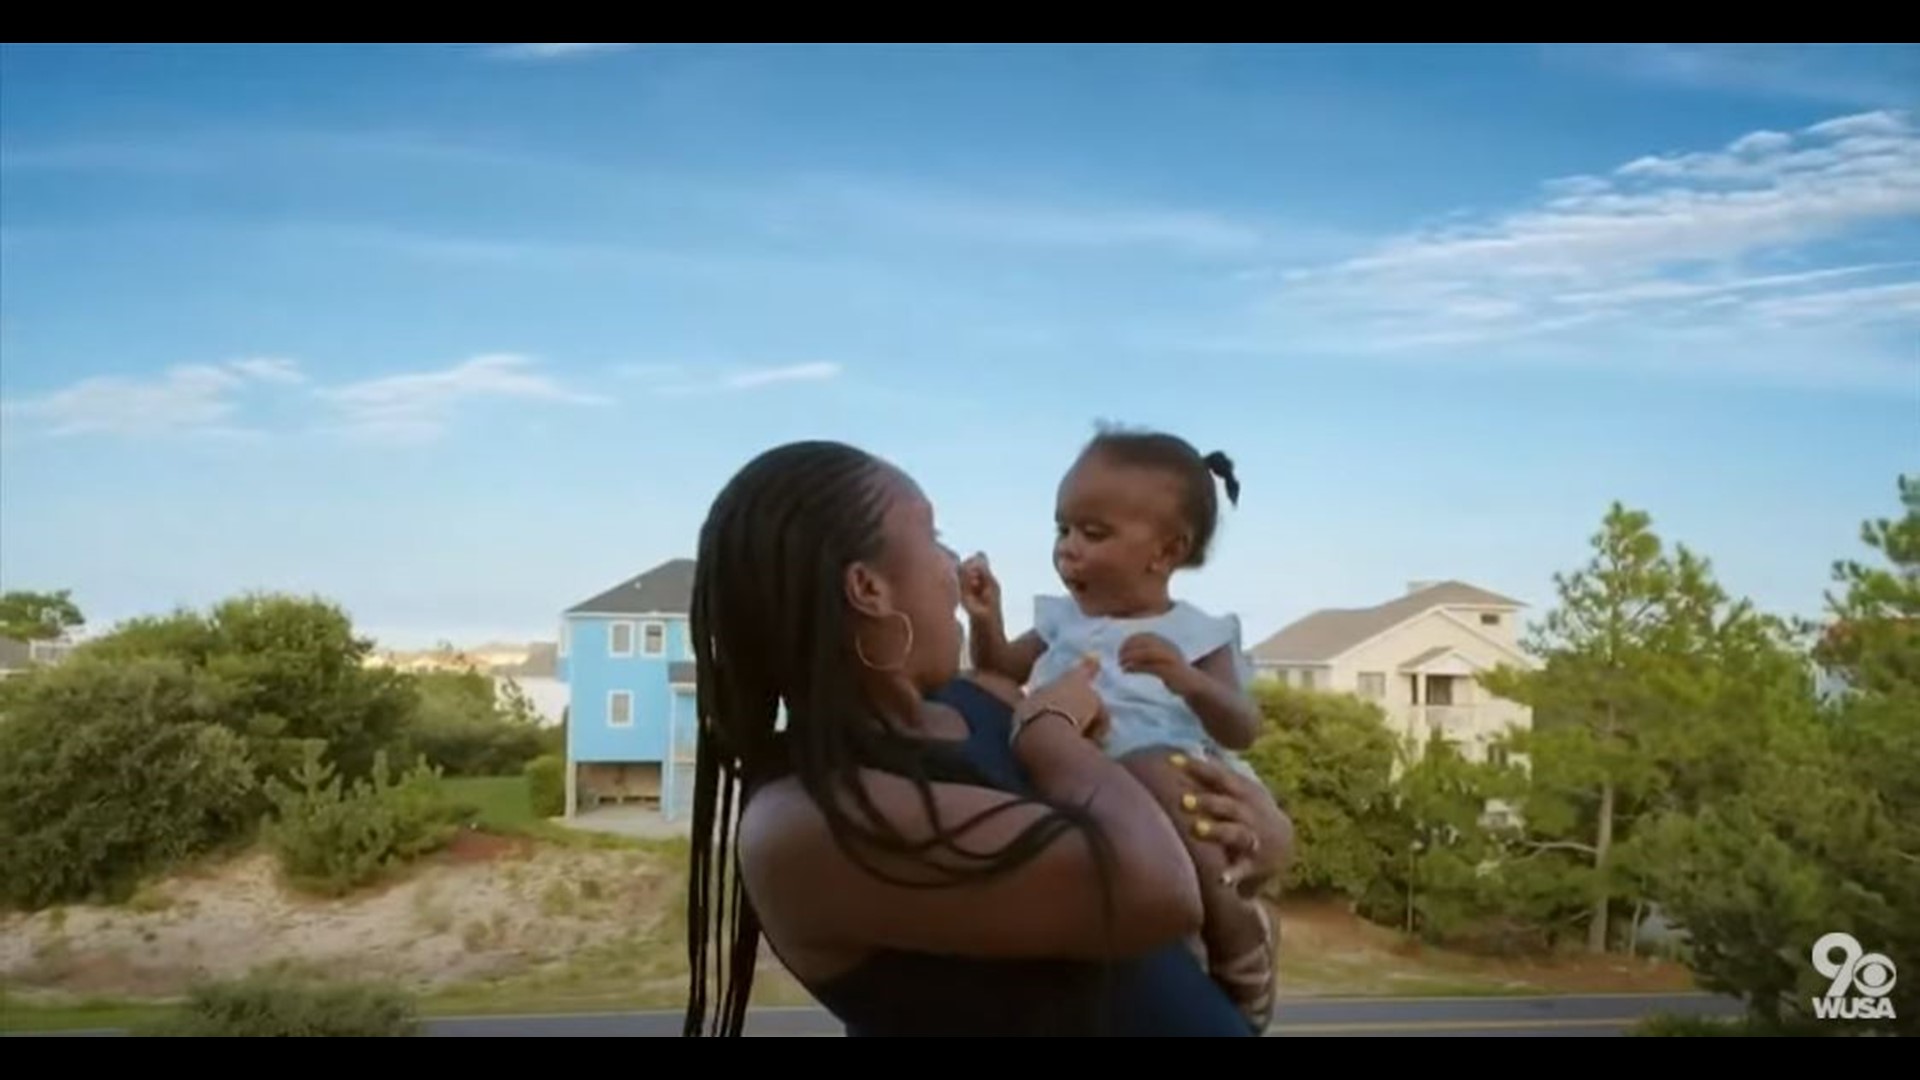 UMD grad Sydney Carter asked her 16-month-old daughter, Aria this very question at the end of Harris' 2020 DNC video. But she didn't expect to cry rewatching it.